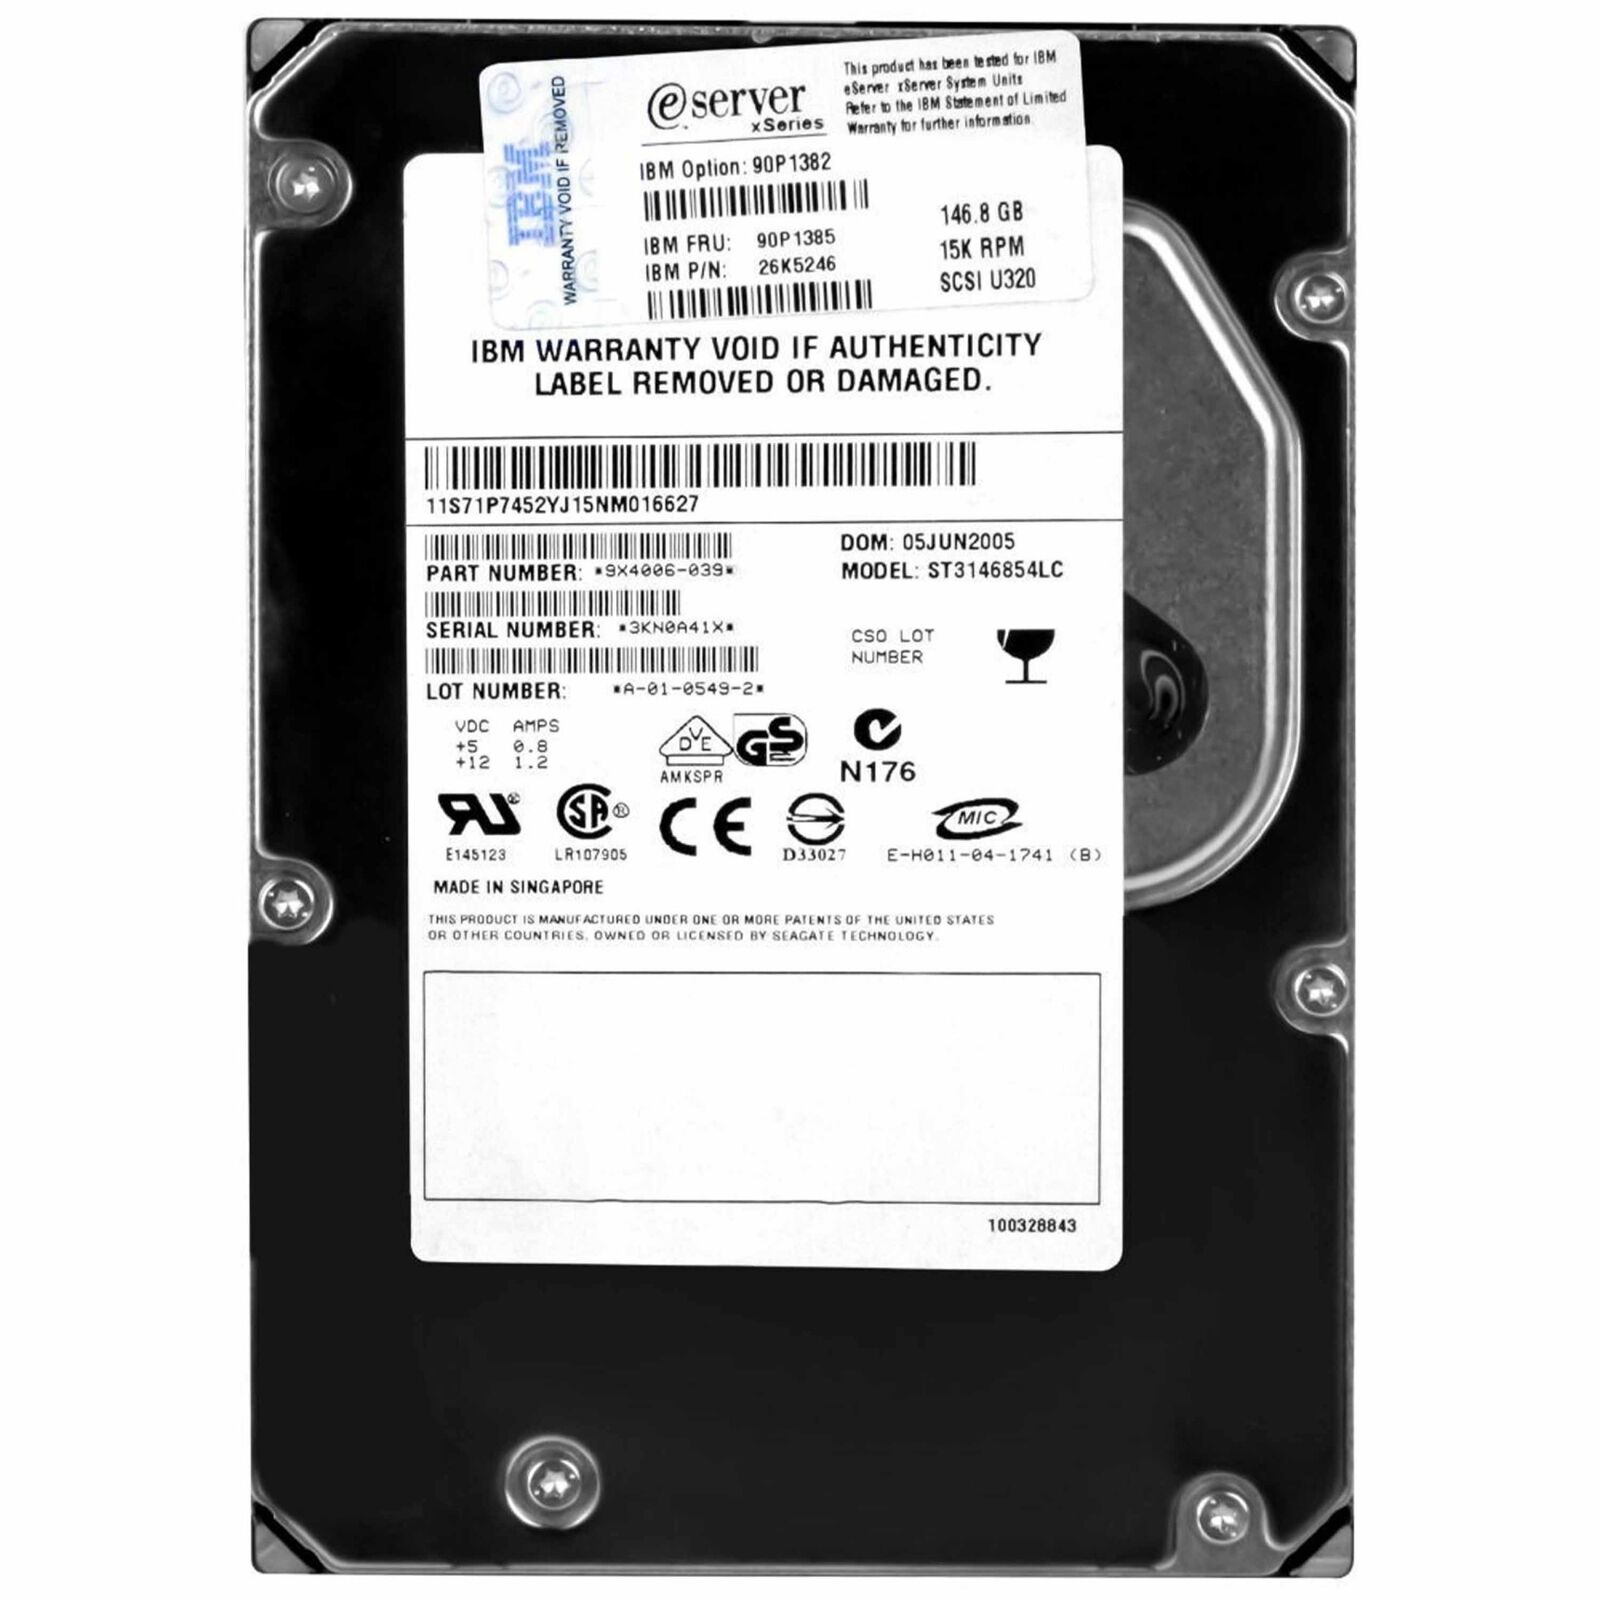 Seagate St3146854lc HDD Hard Disk SCSI 146.8gb 80pin 3,5 